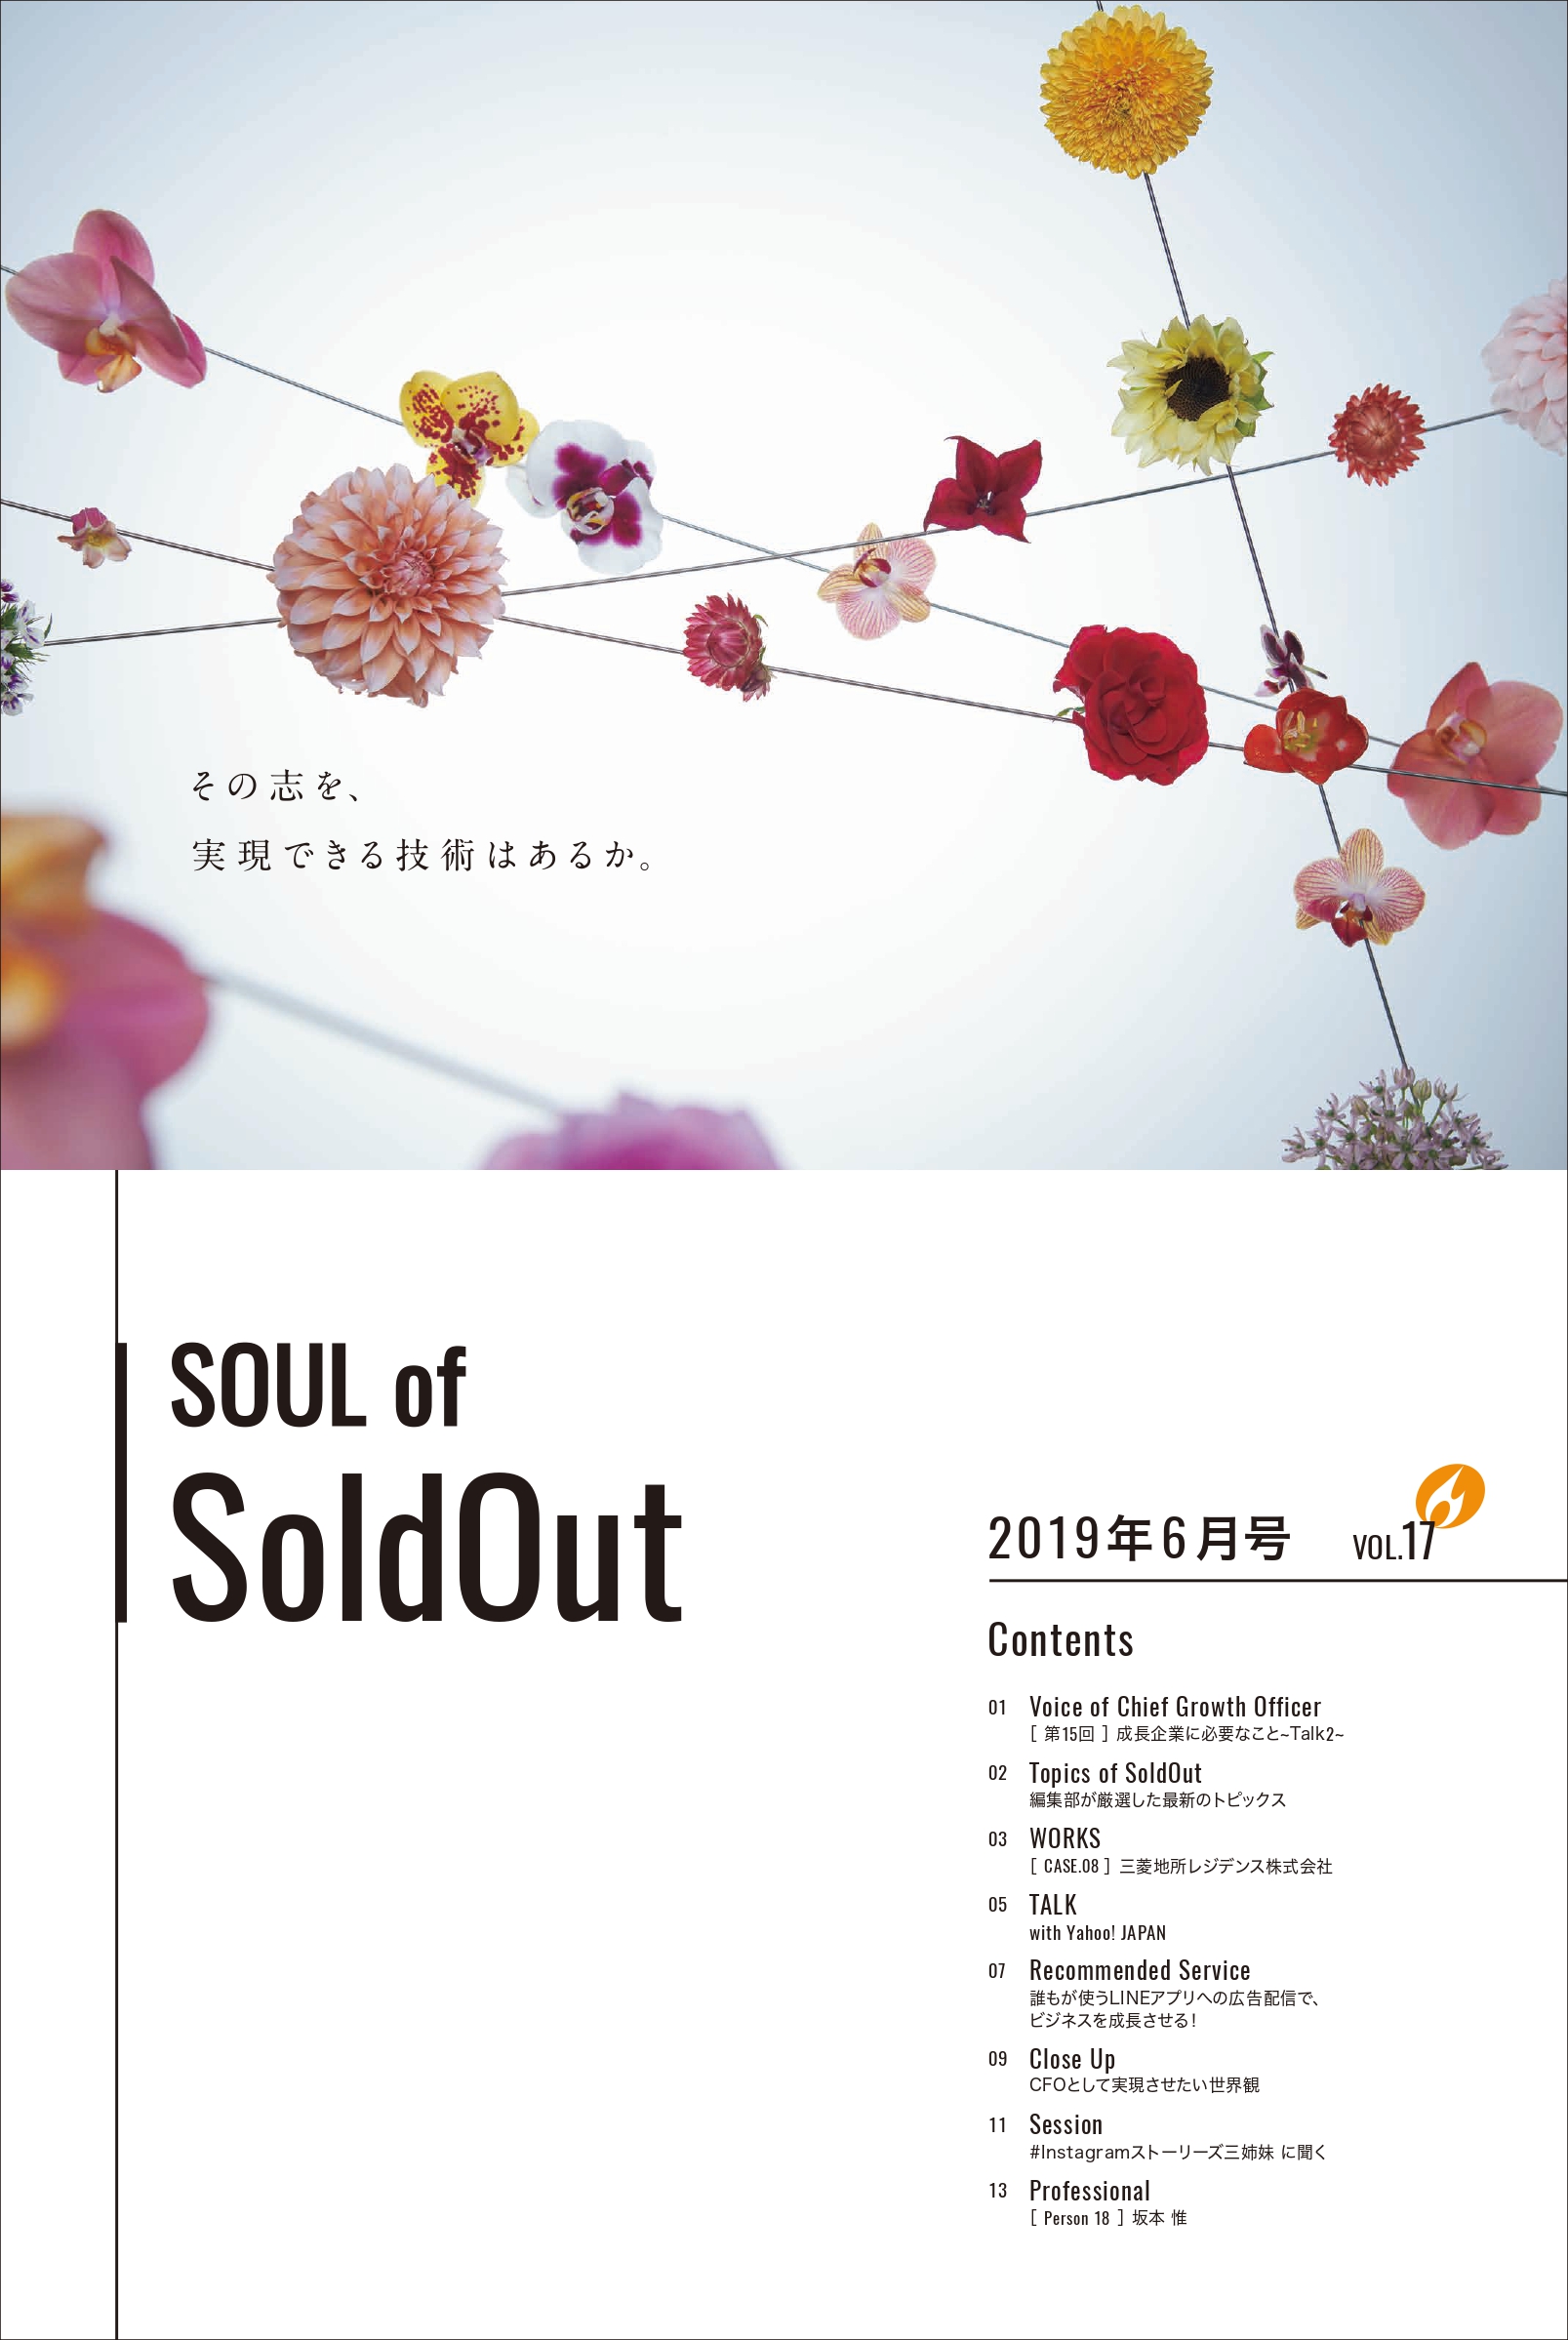 SOUL of SoldOut